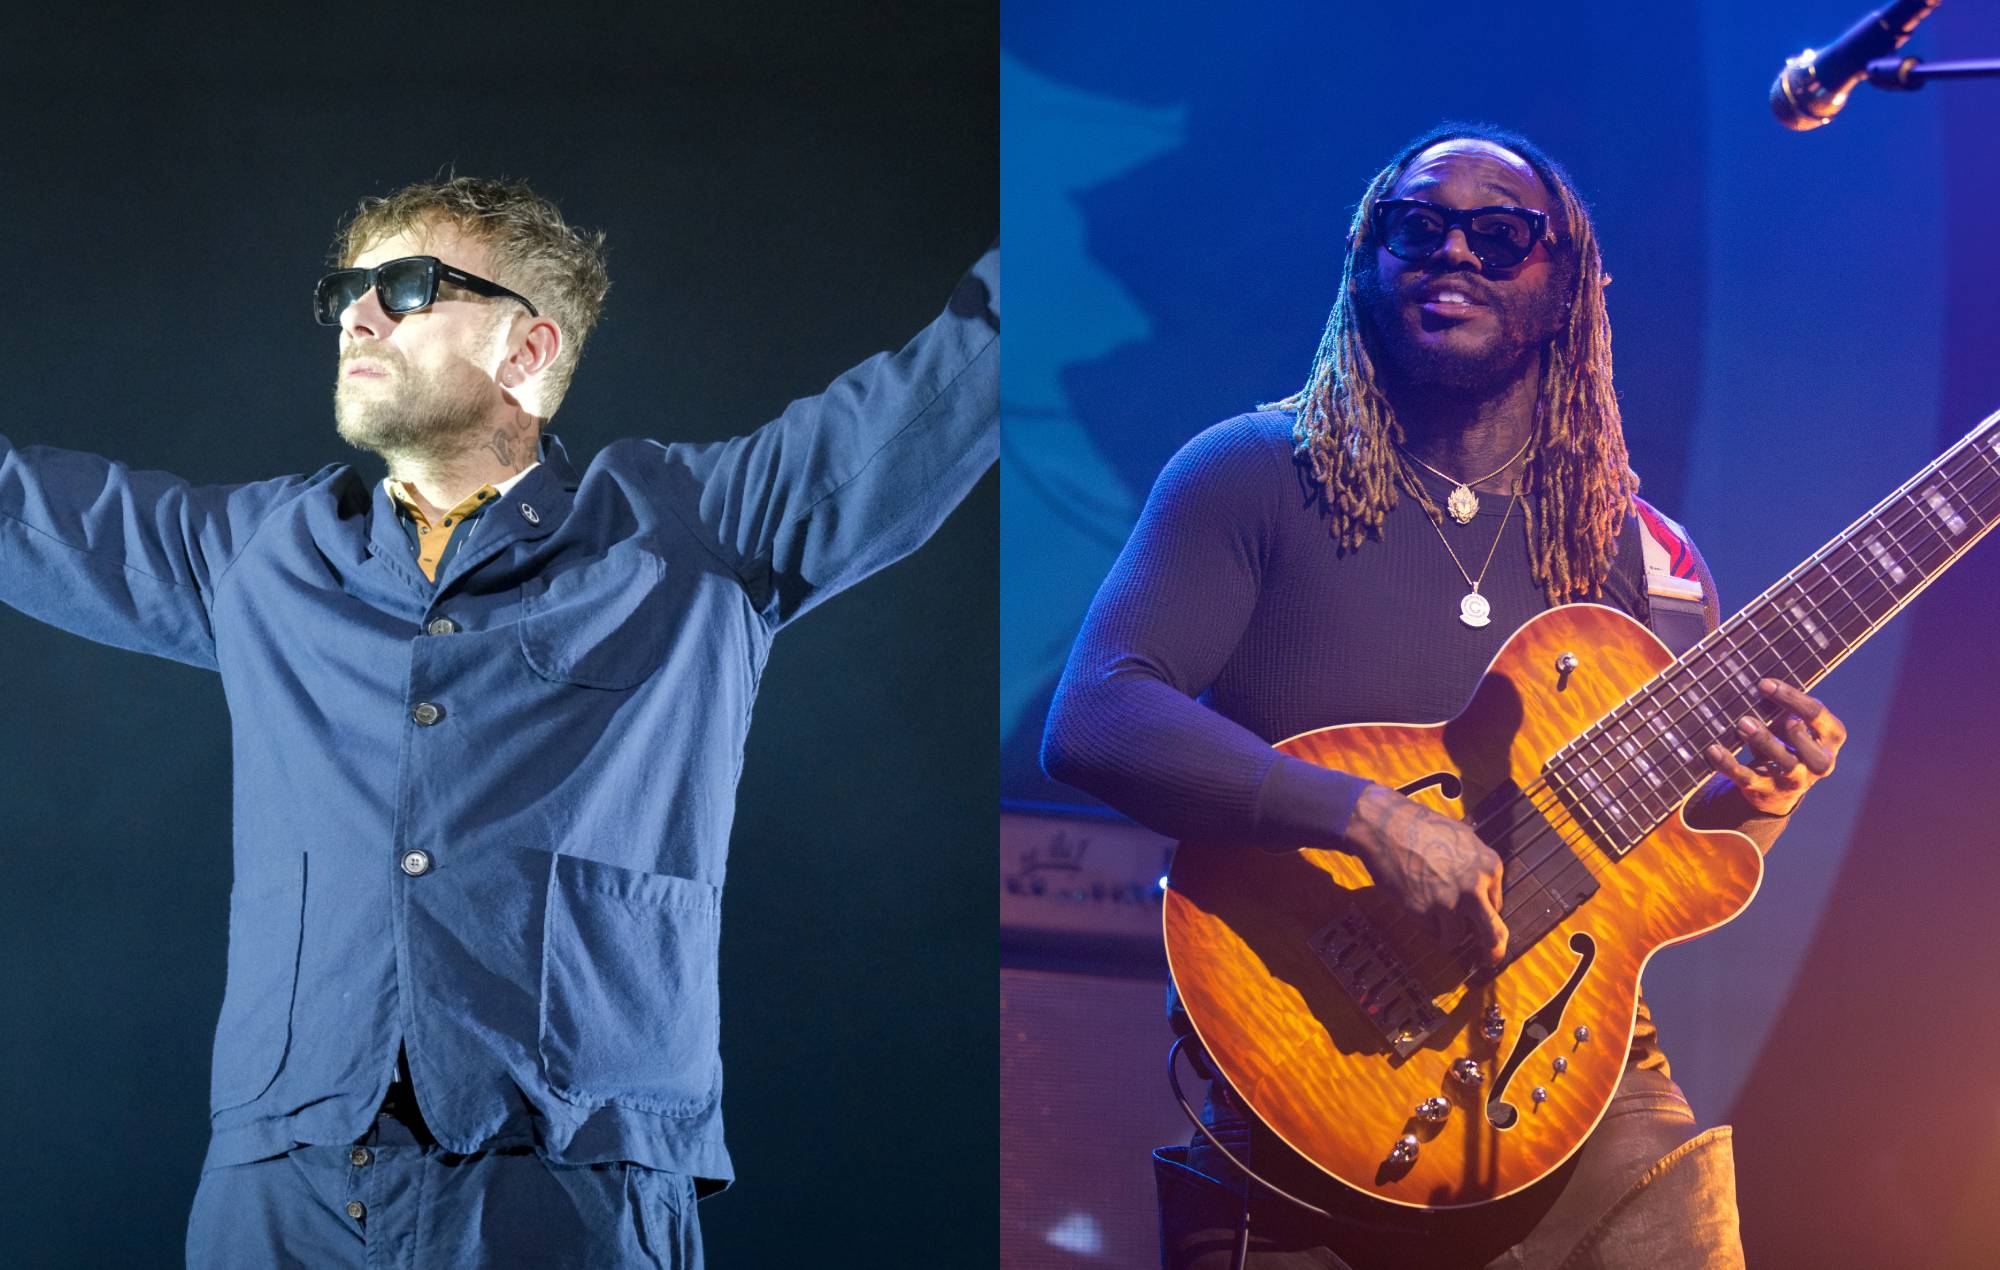 Watch Damon Albarn join Thundercat on stage at London show for solo tracks and a Gorillaz song